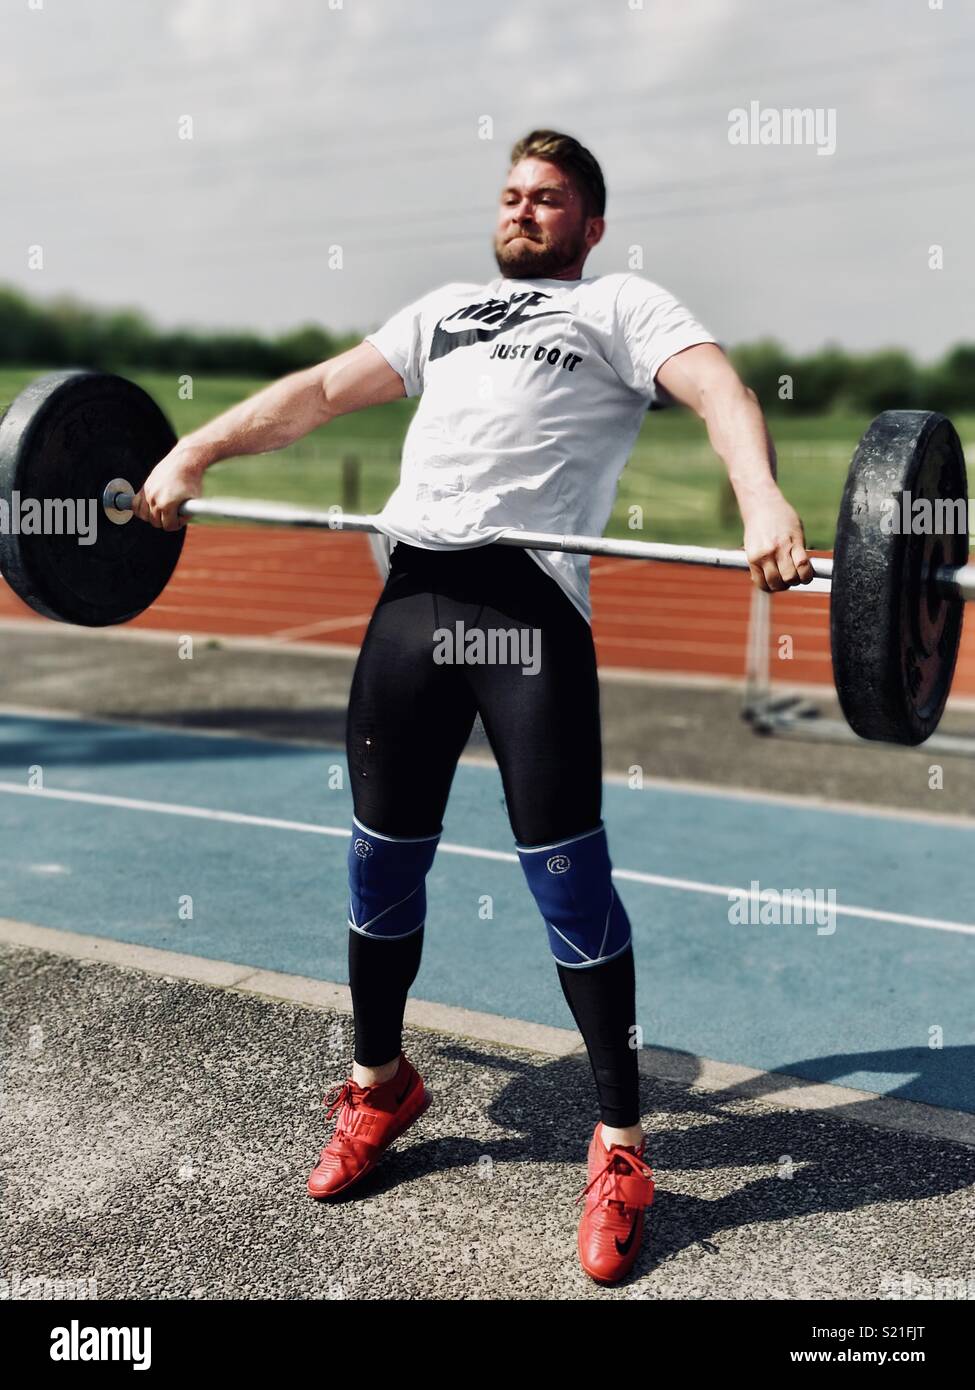 Olympic Weightlifter performing a snatch on an athletics track. Stock Photo